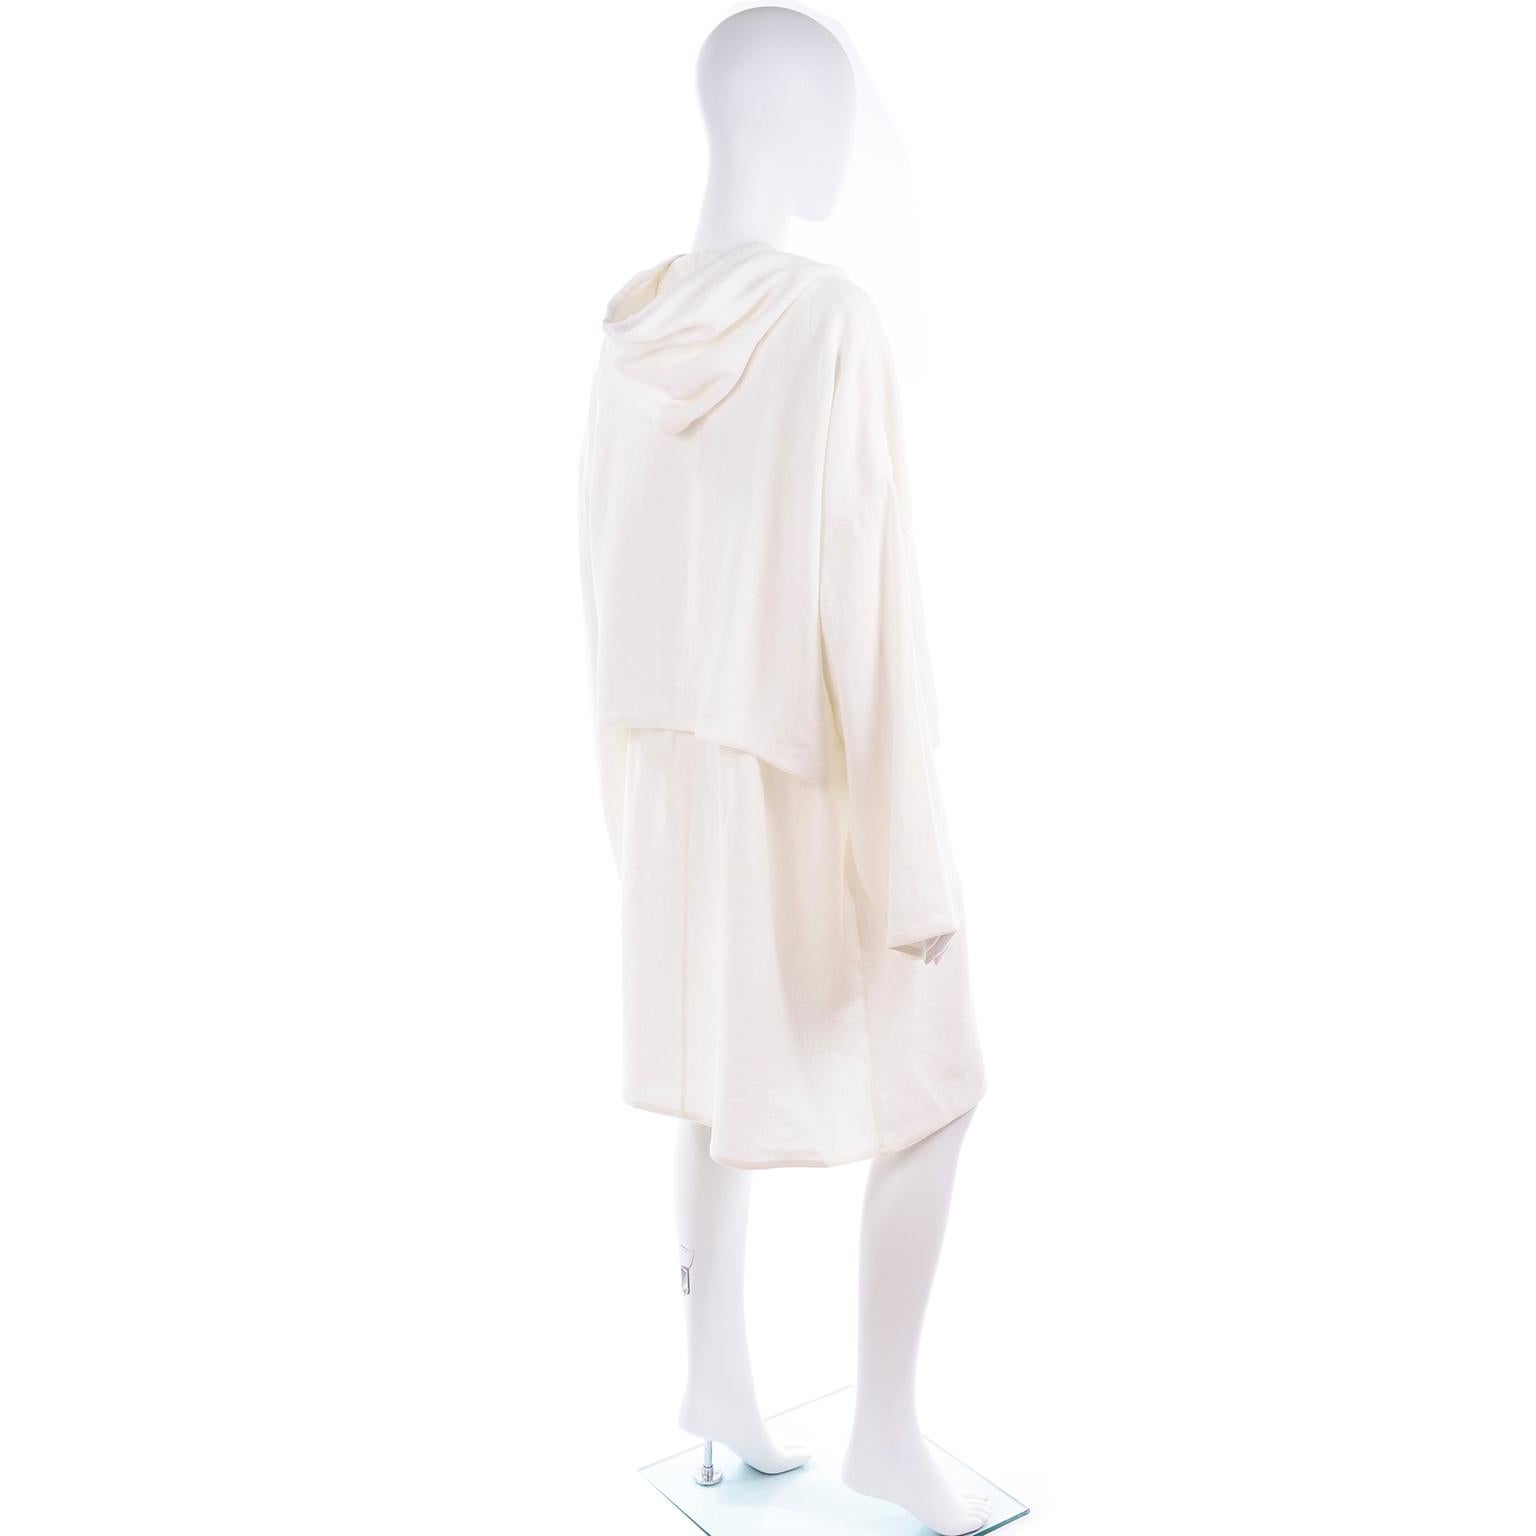 Deadstock New White Linen Dusan Coat Drawstring Jacket with Hood New With Tags 1